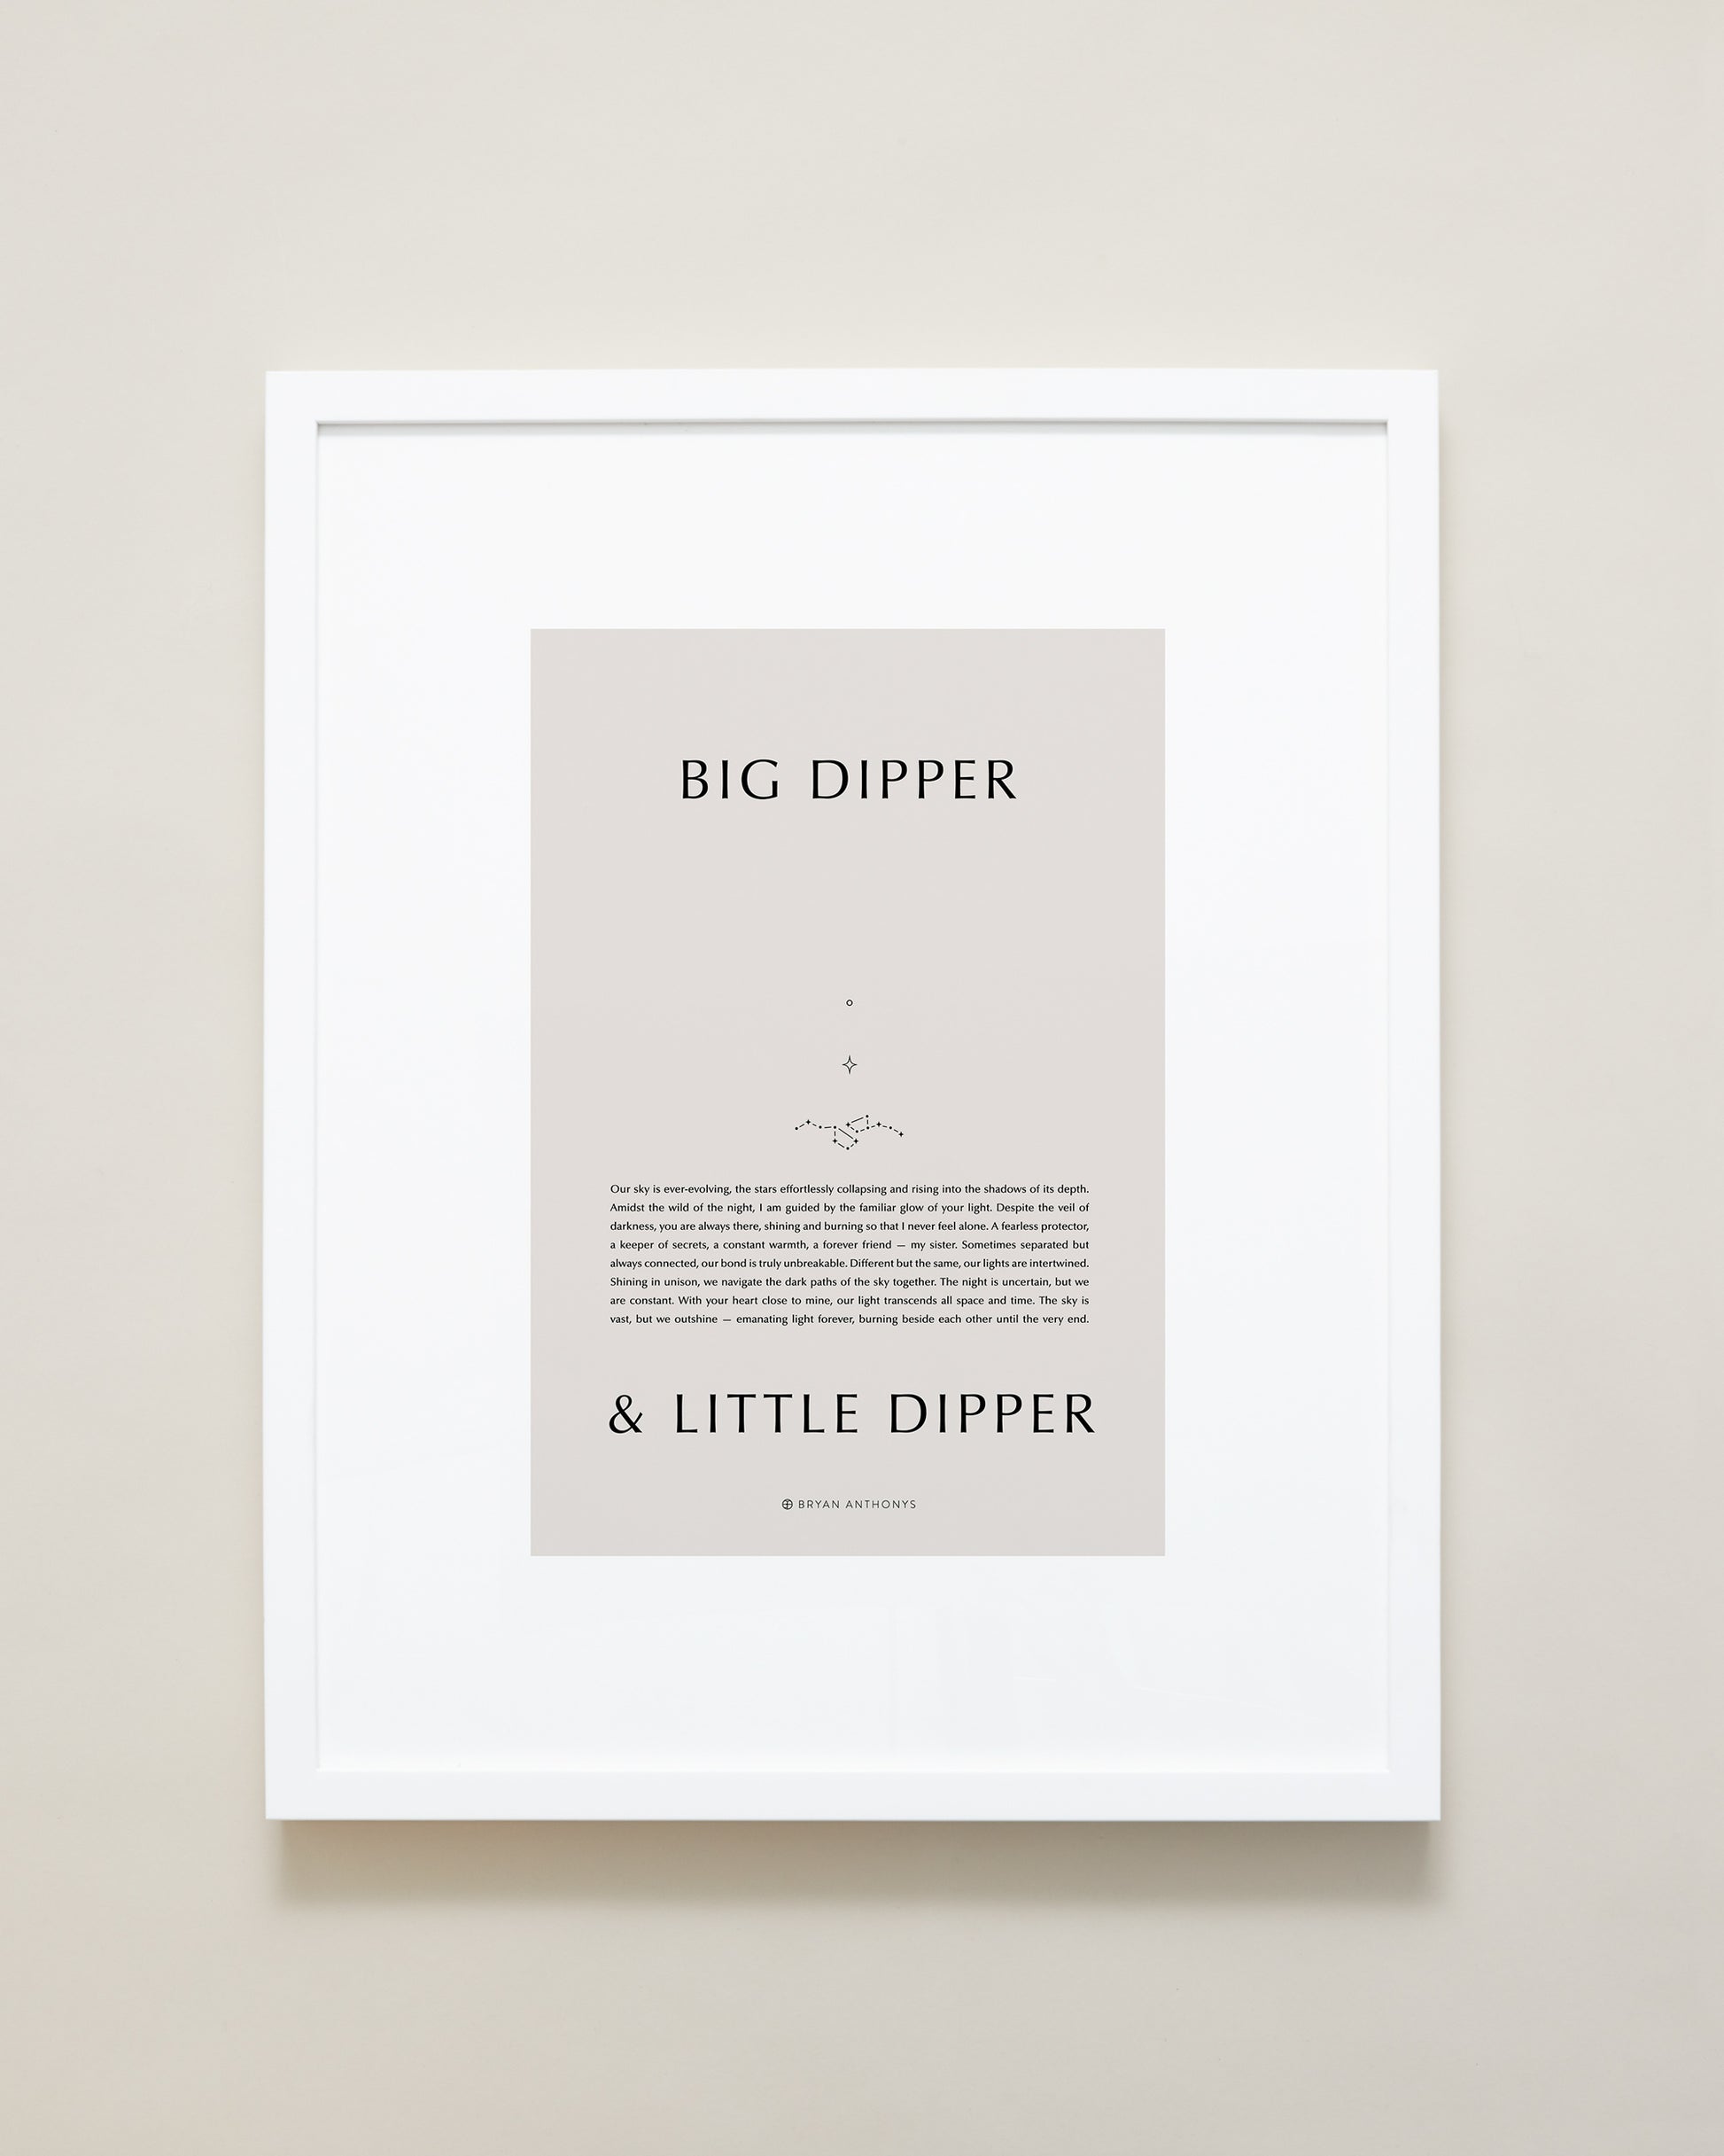 Bryan Anthonys Home Decor Purposeful Prints Big Dipper & Little Dipper Iconic Framed Print Tan Art With White Frame 16x20